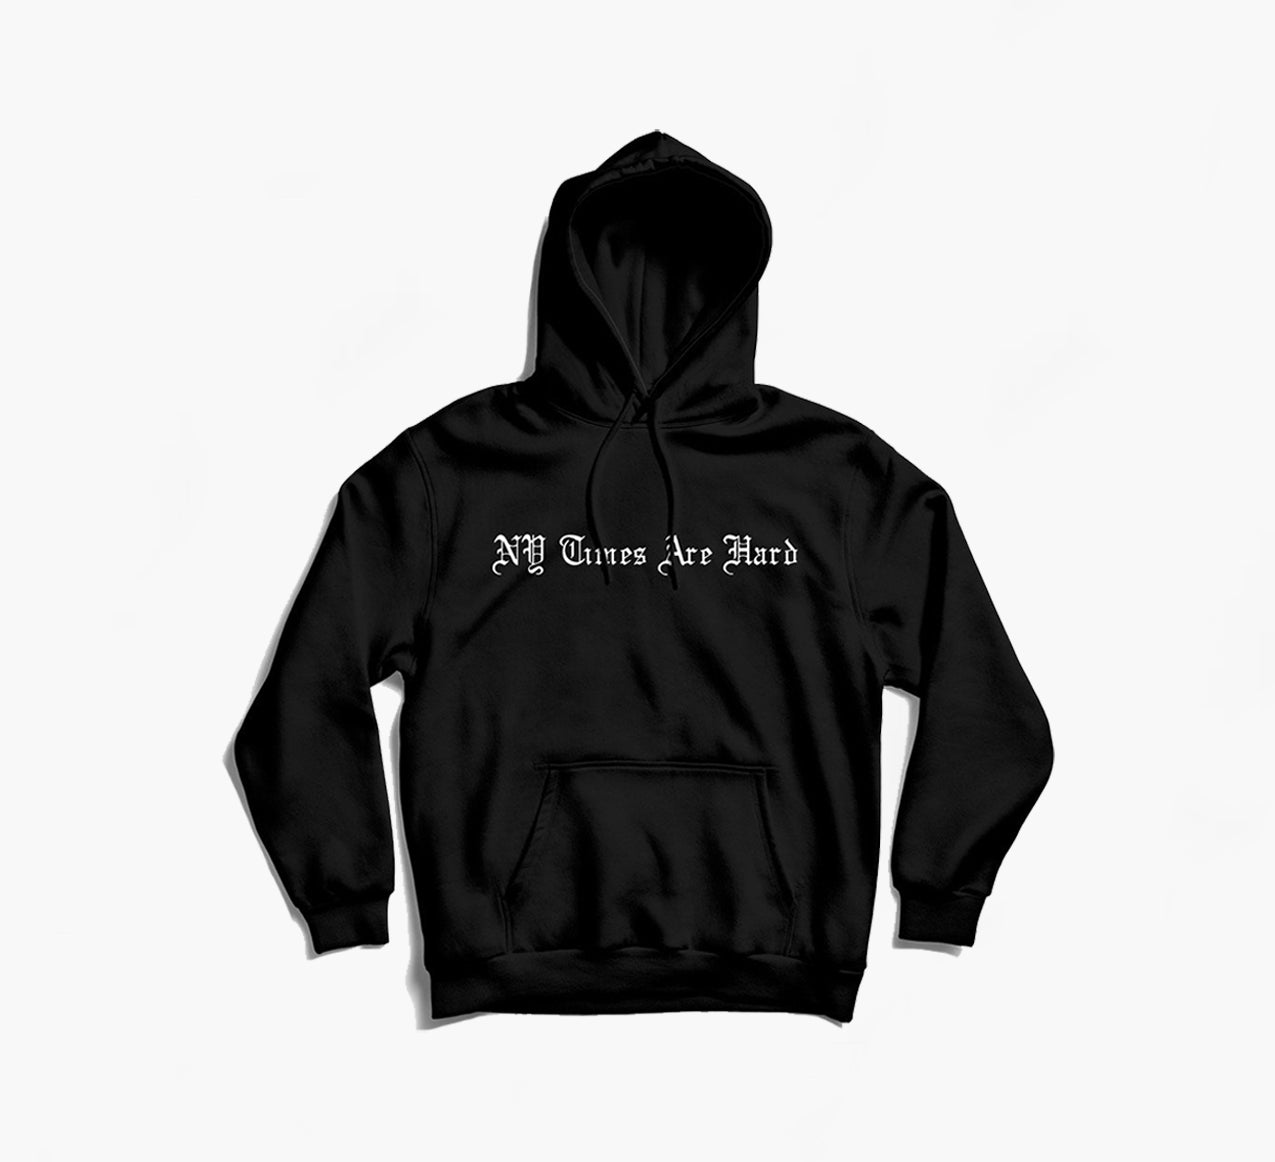 NY Times Are Hard Black Hoodie